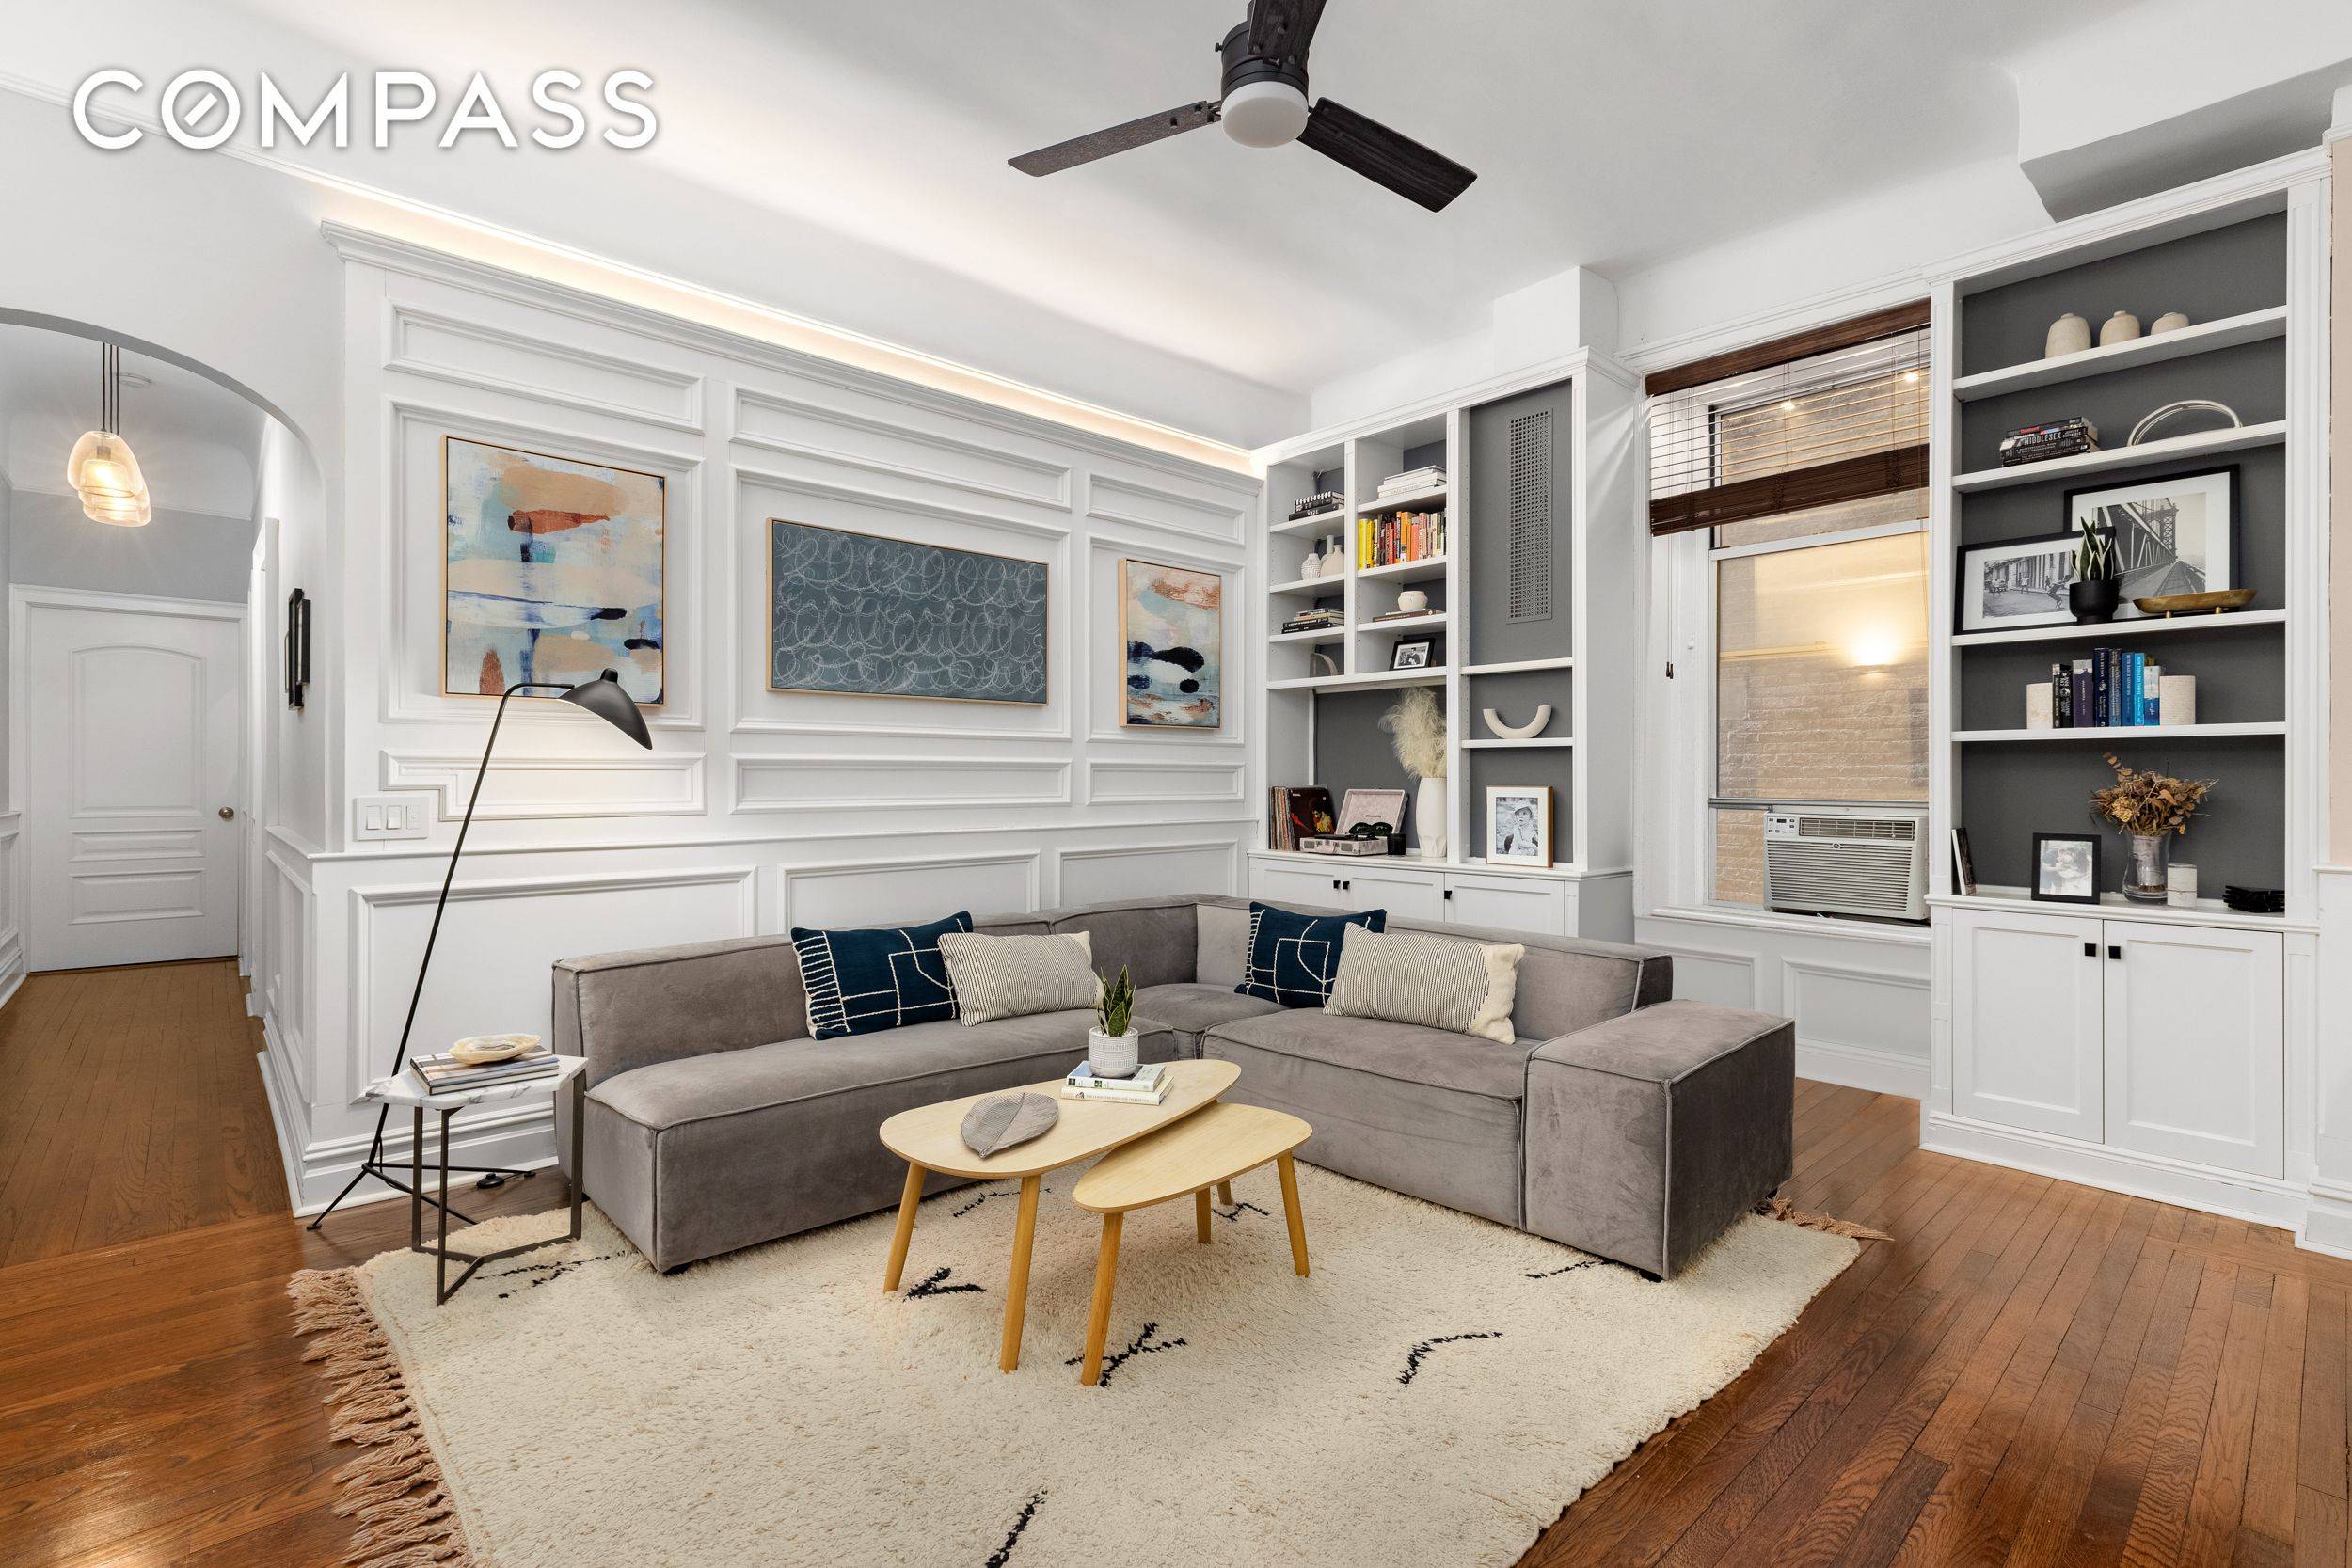 The first things you will notice when entering this 2 bedroom, 2 full bathroom home is the exquisite wainscoting and the ceiling height of nearly 11 feet.